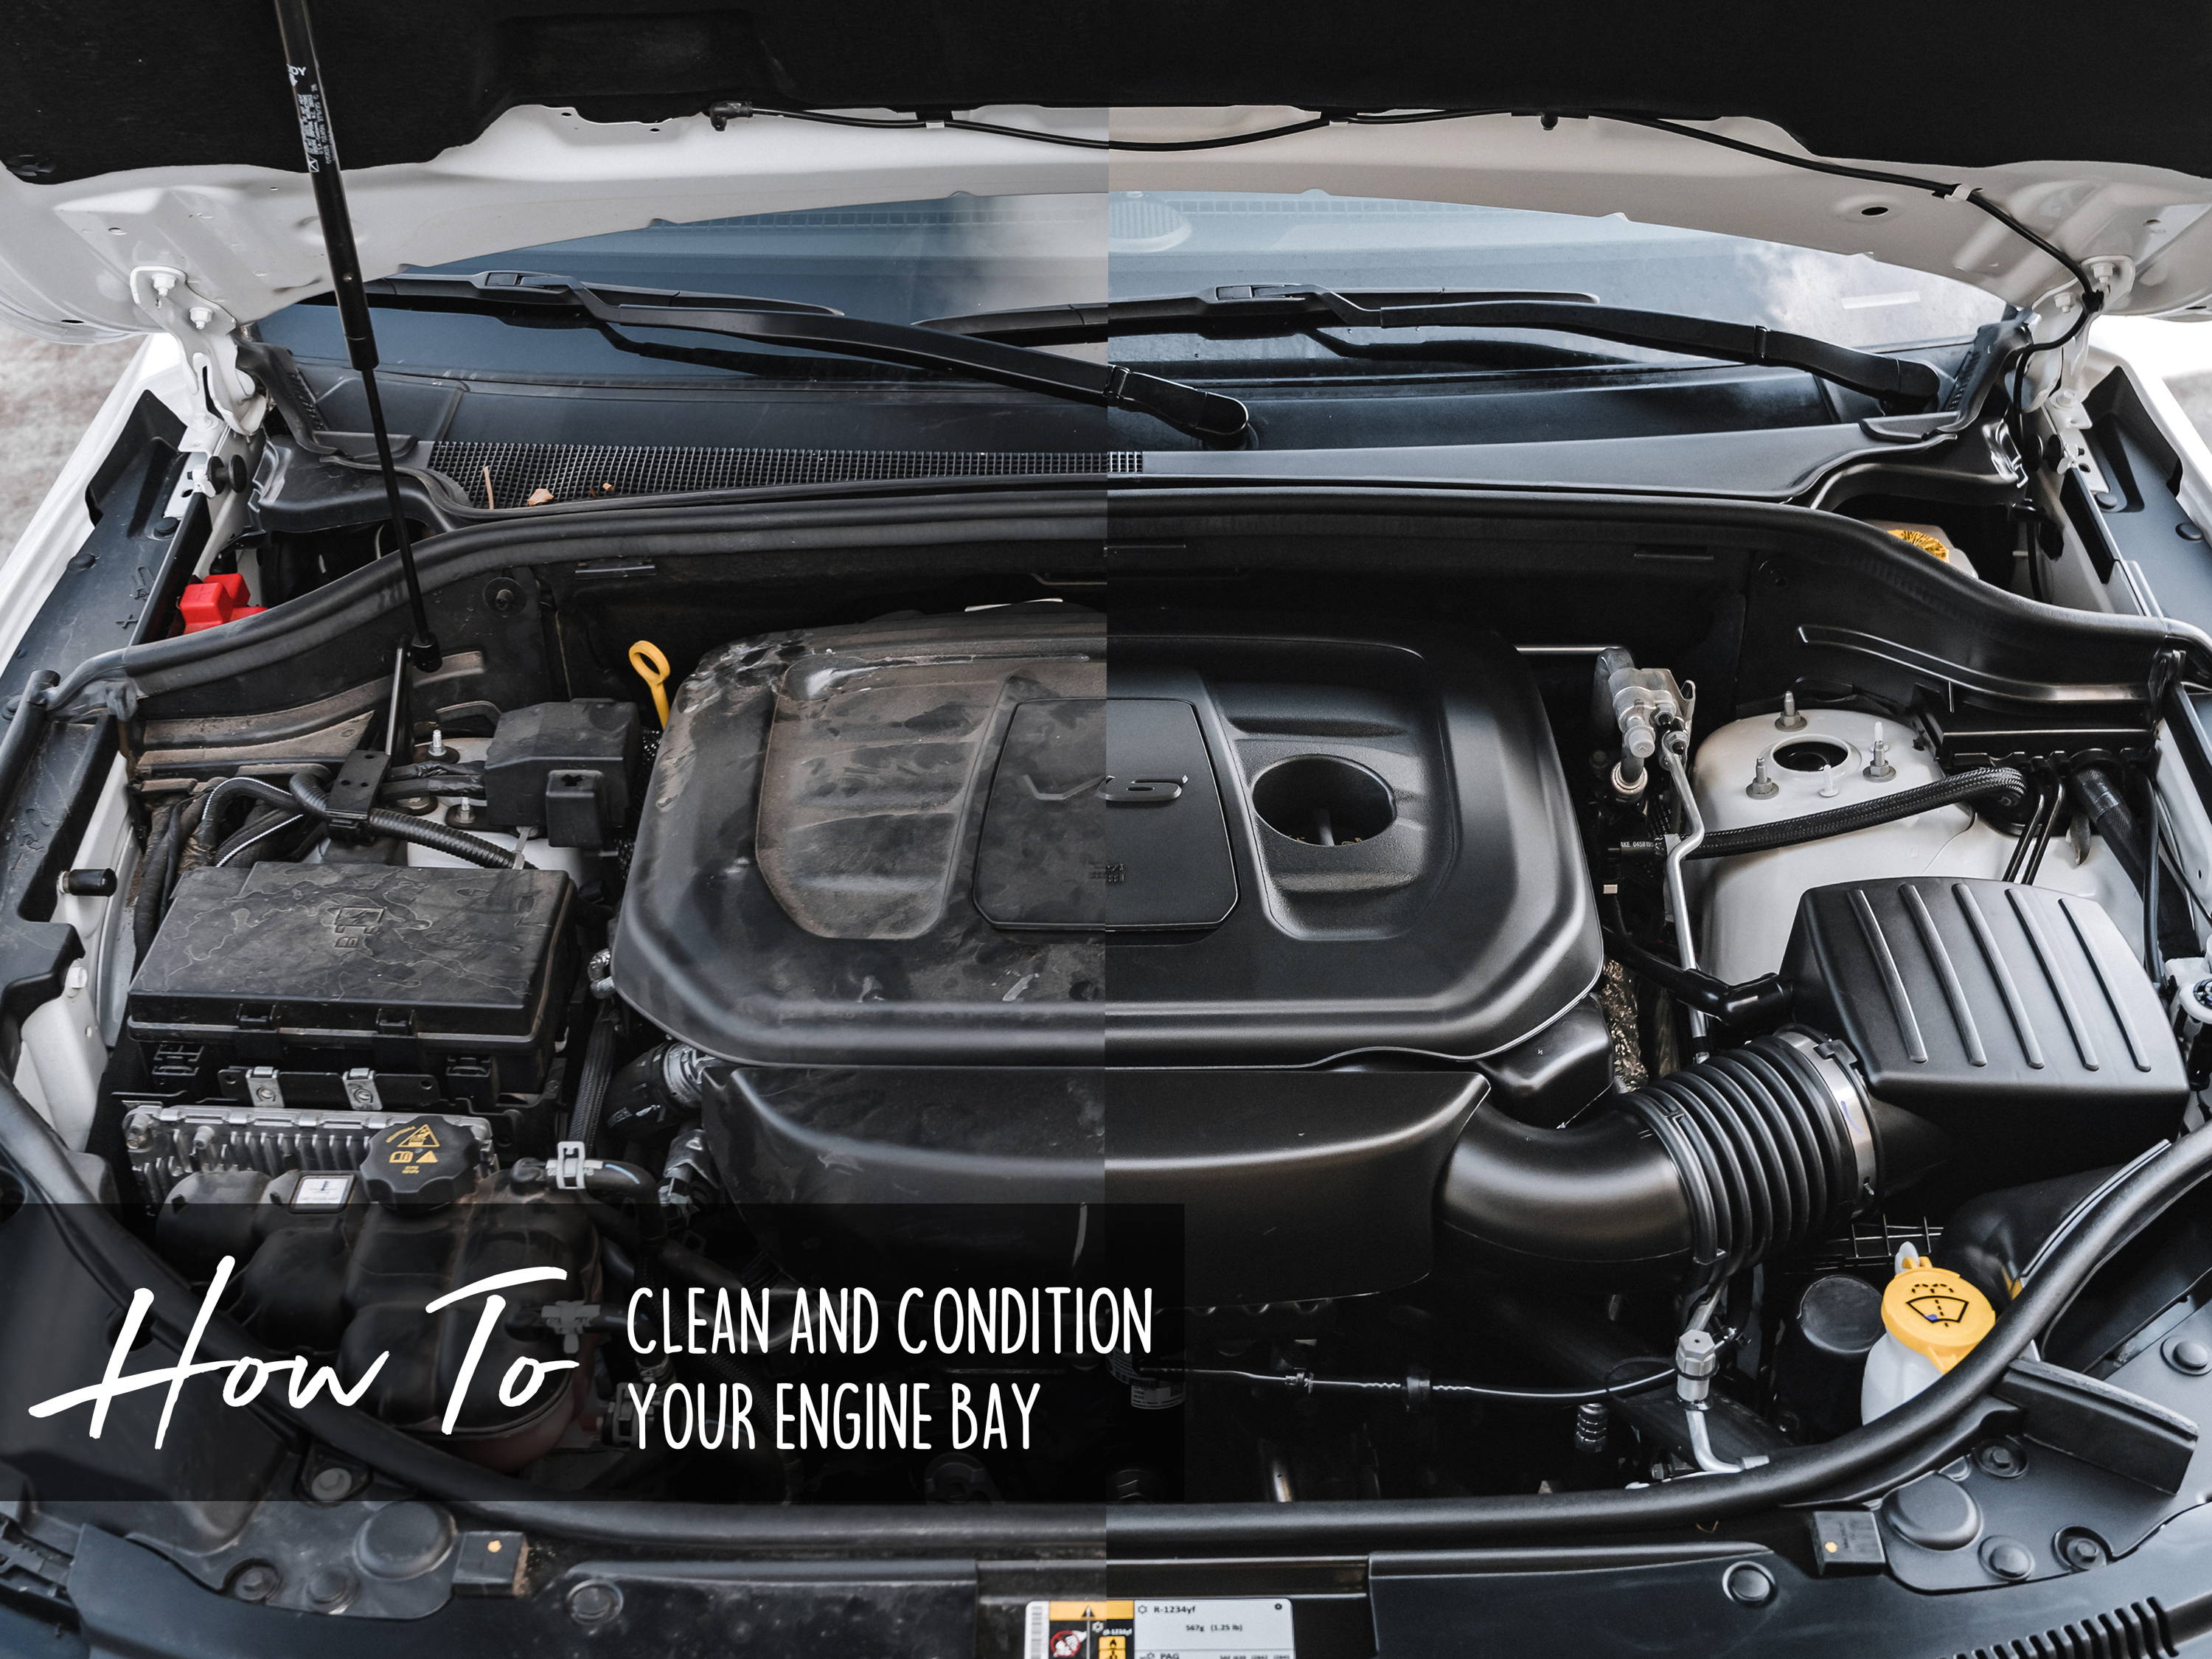 How to properly clean your engine bay!